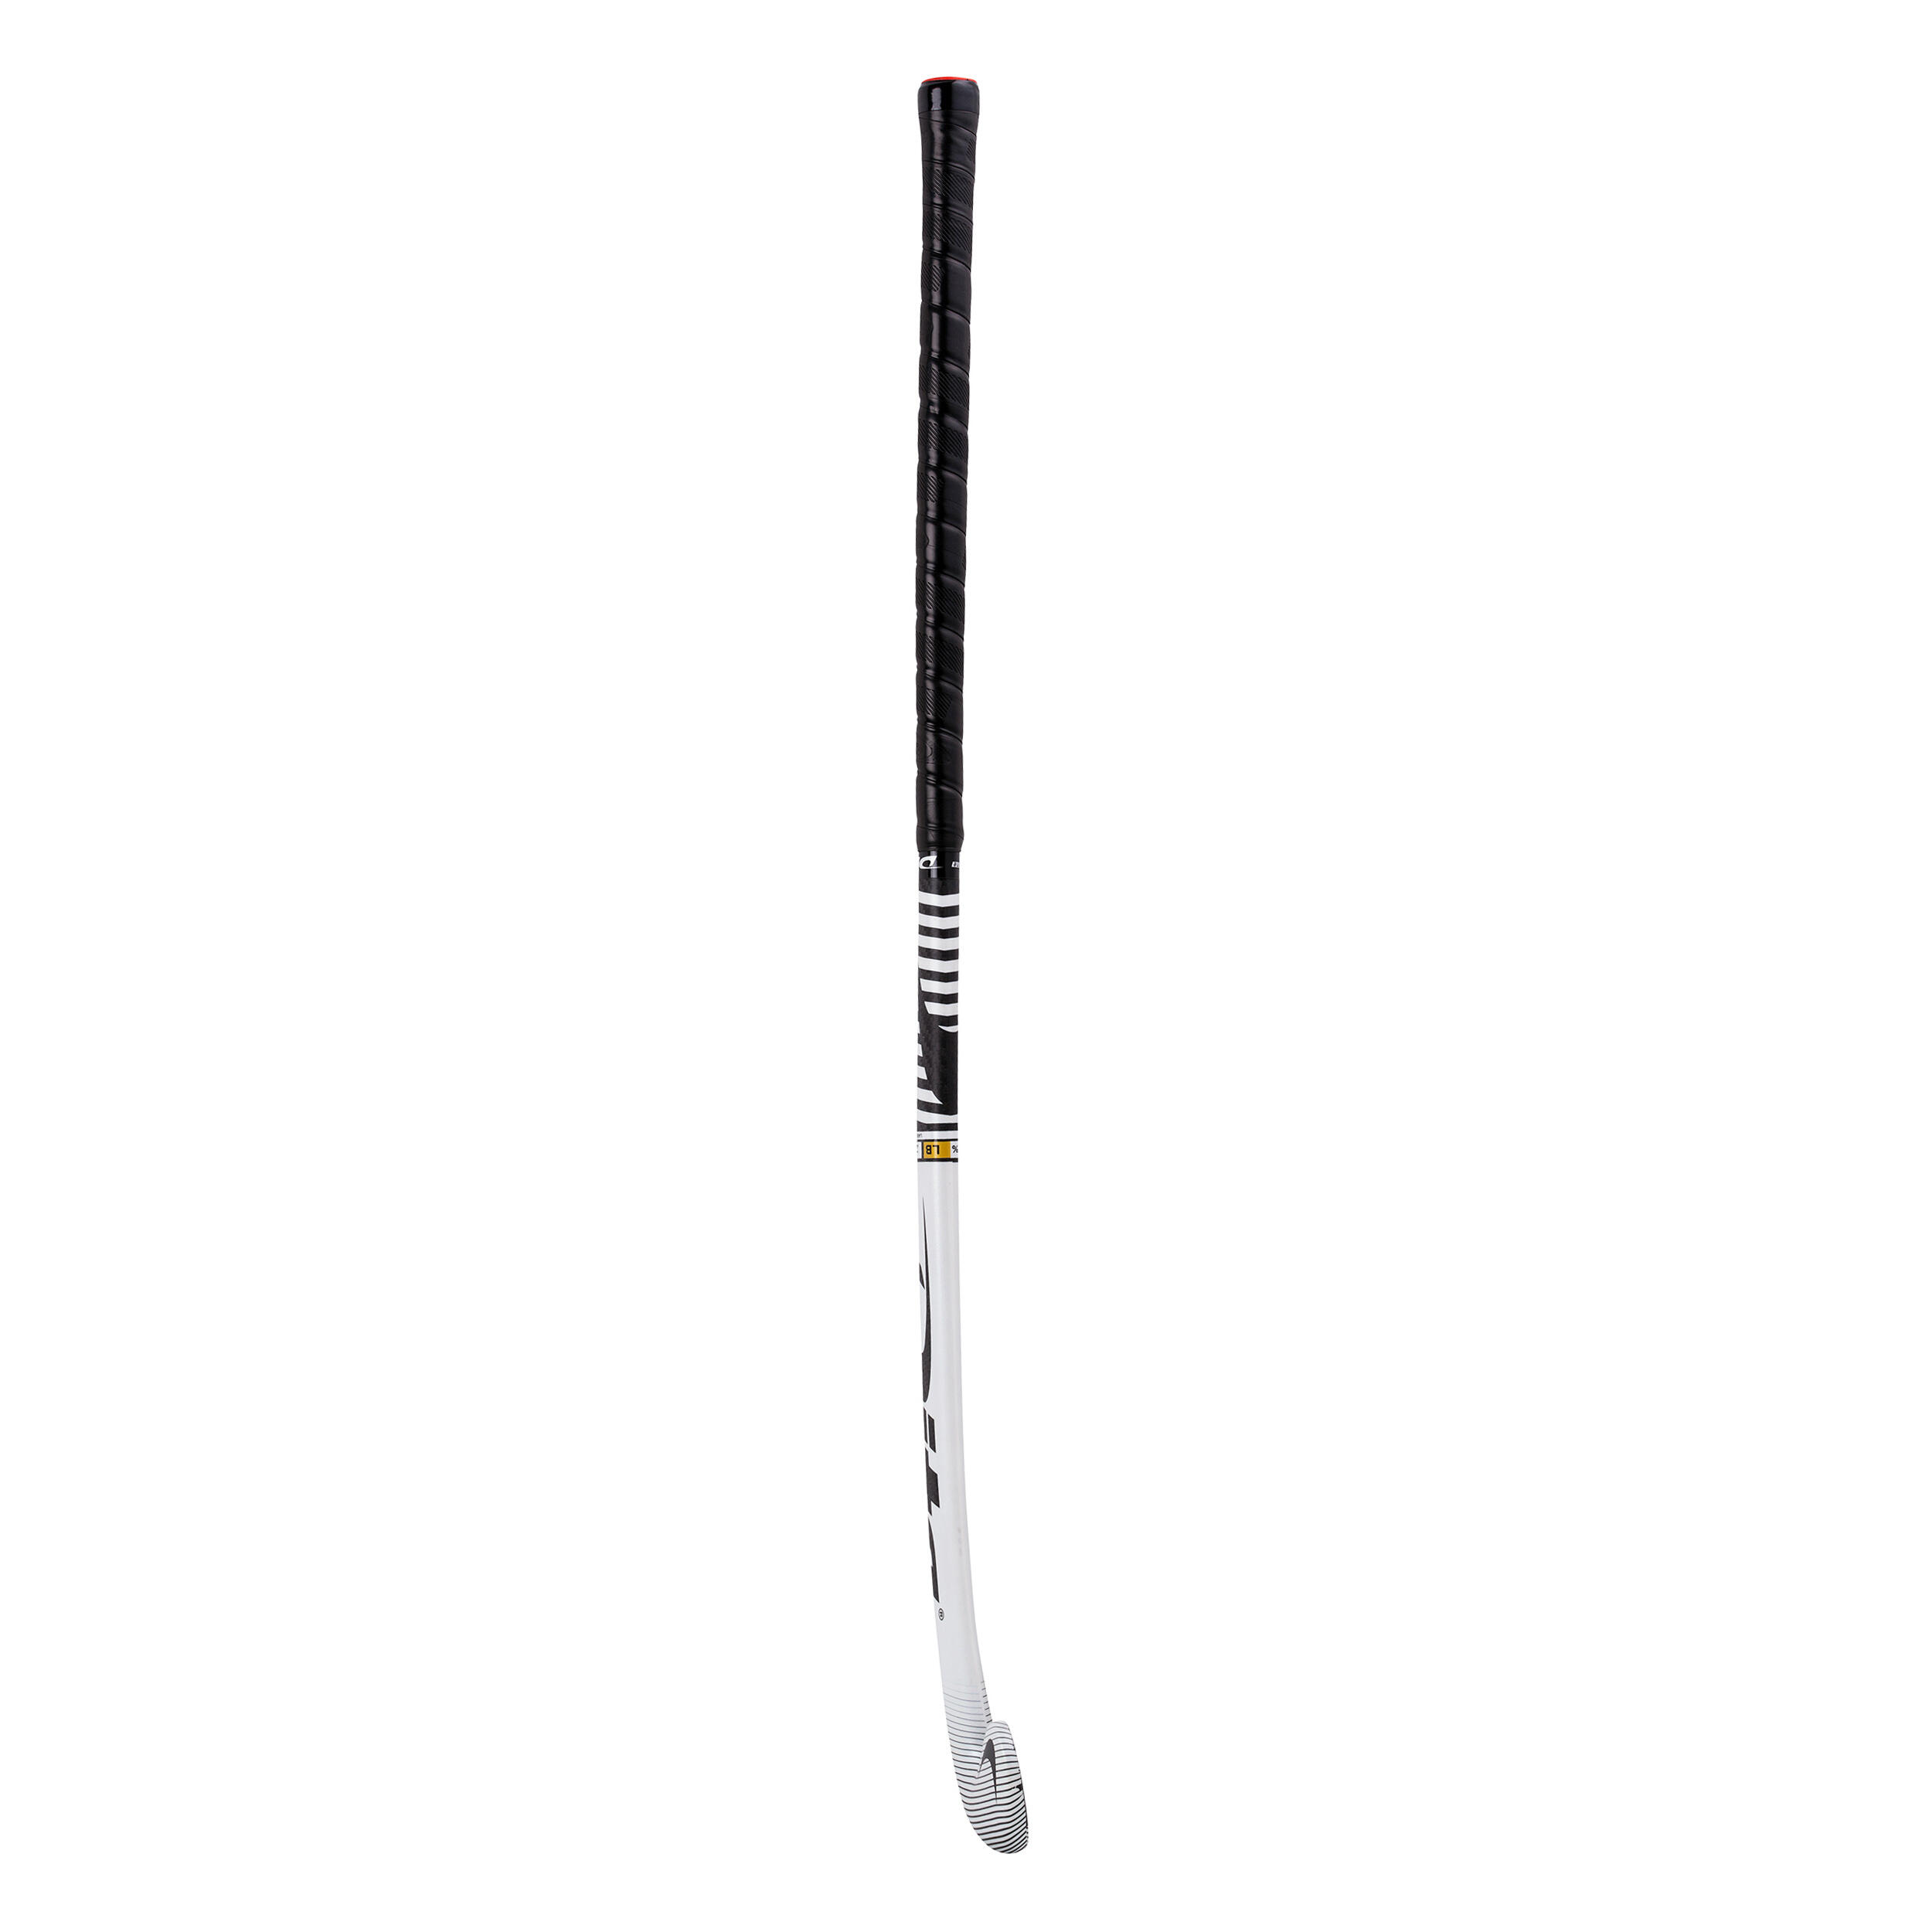 Adult Intermediate 60% Carbon Low Bow Field Hockey Stick CompotecC60 - White/Black 12/12